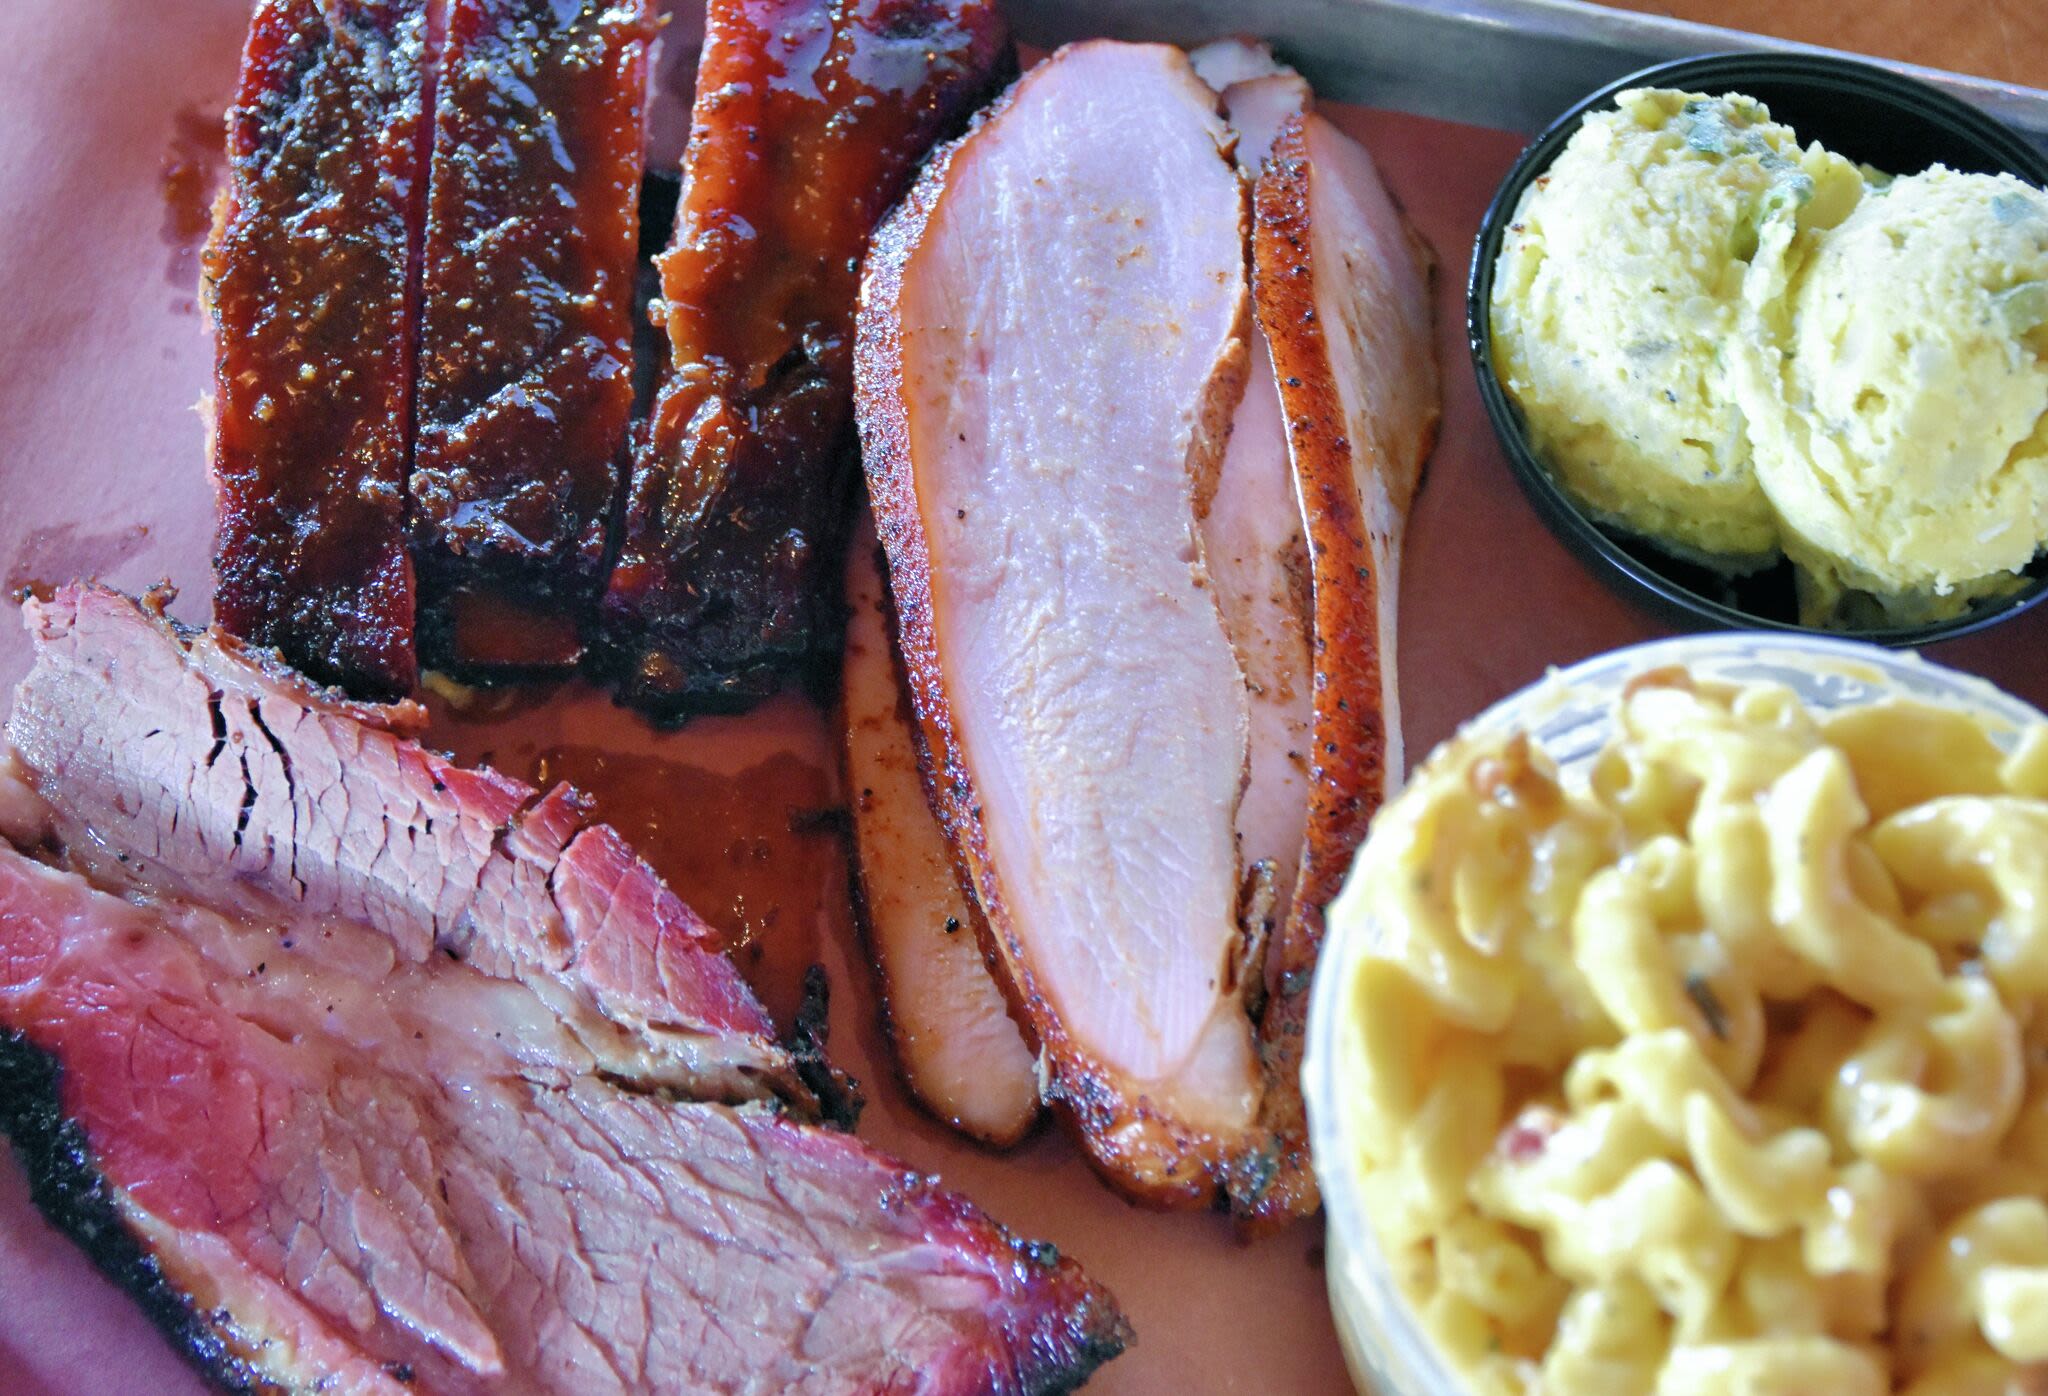 Popular Texas barbecue spot visited by world-famous businessman